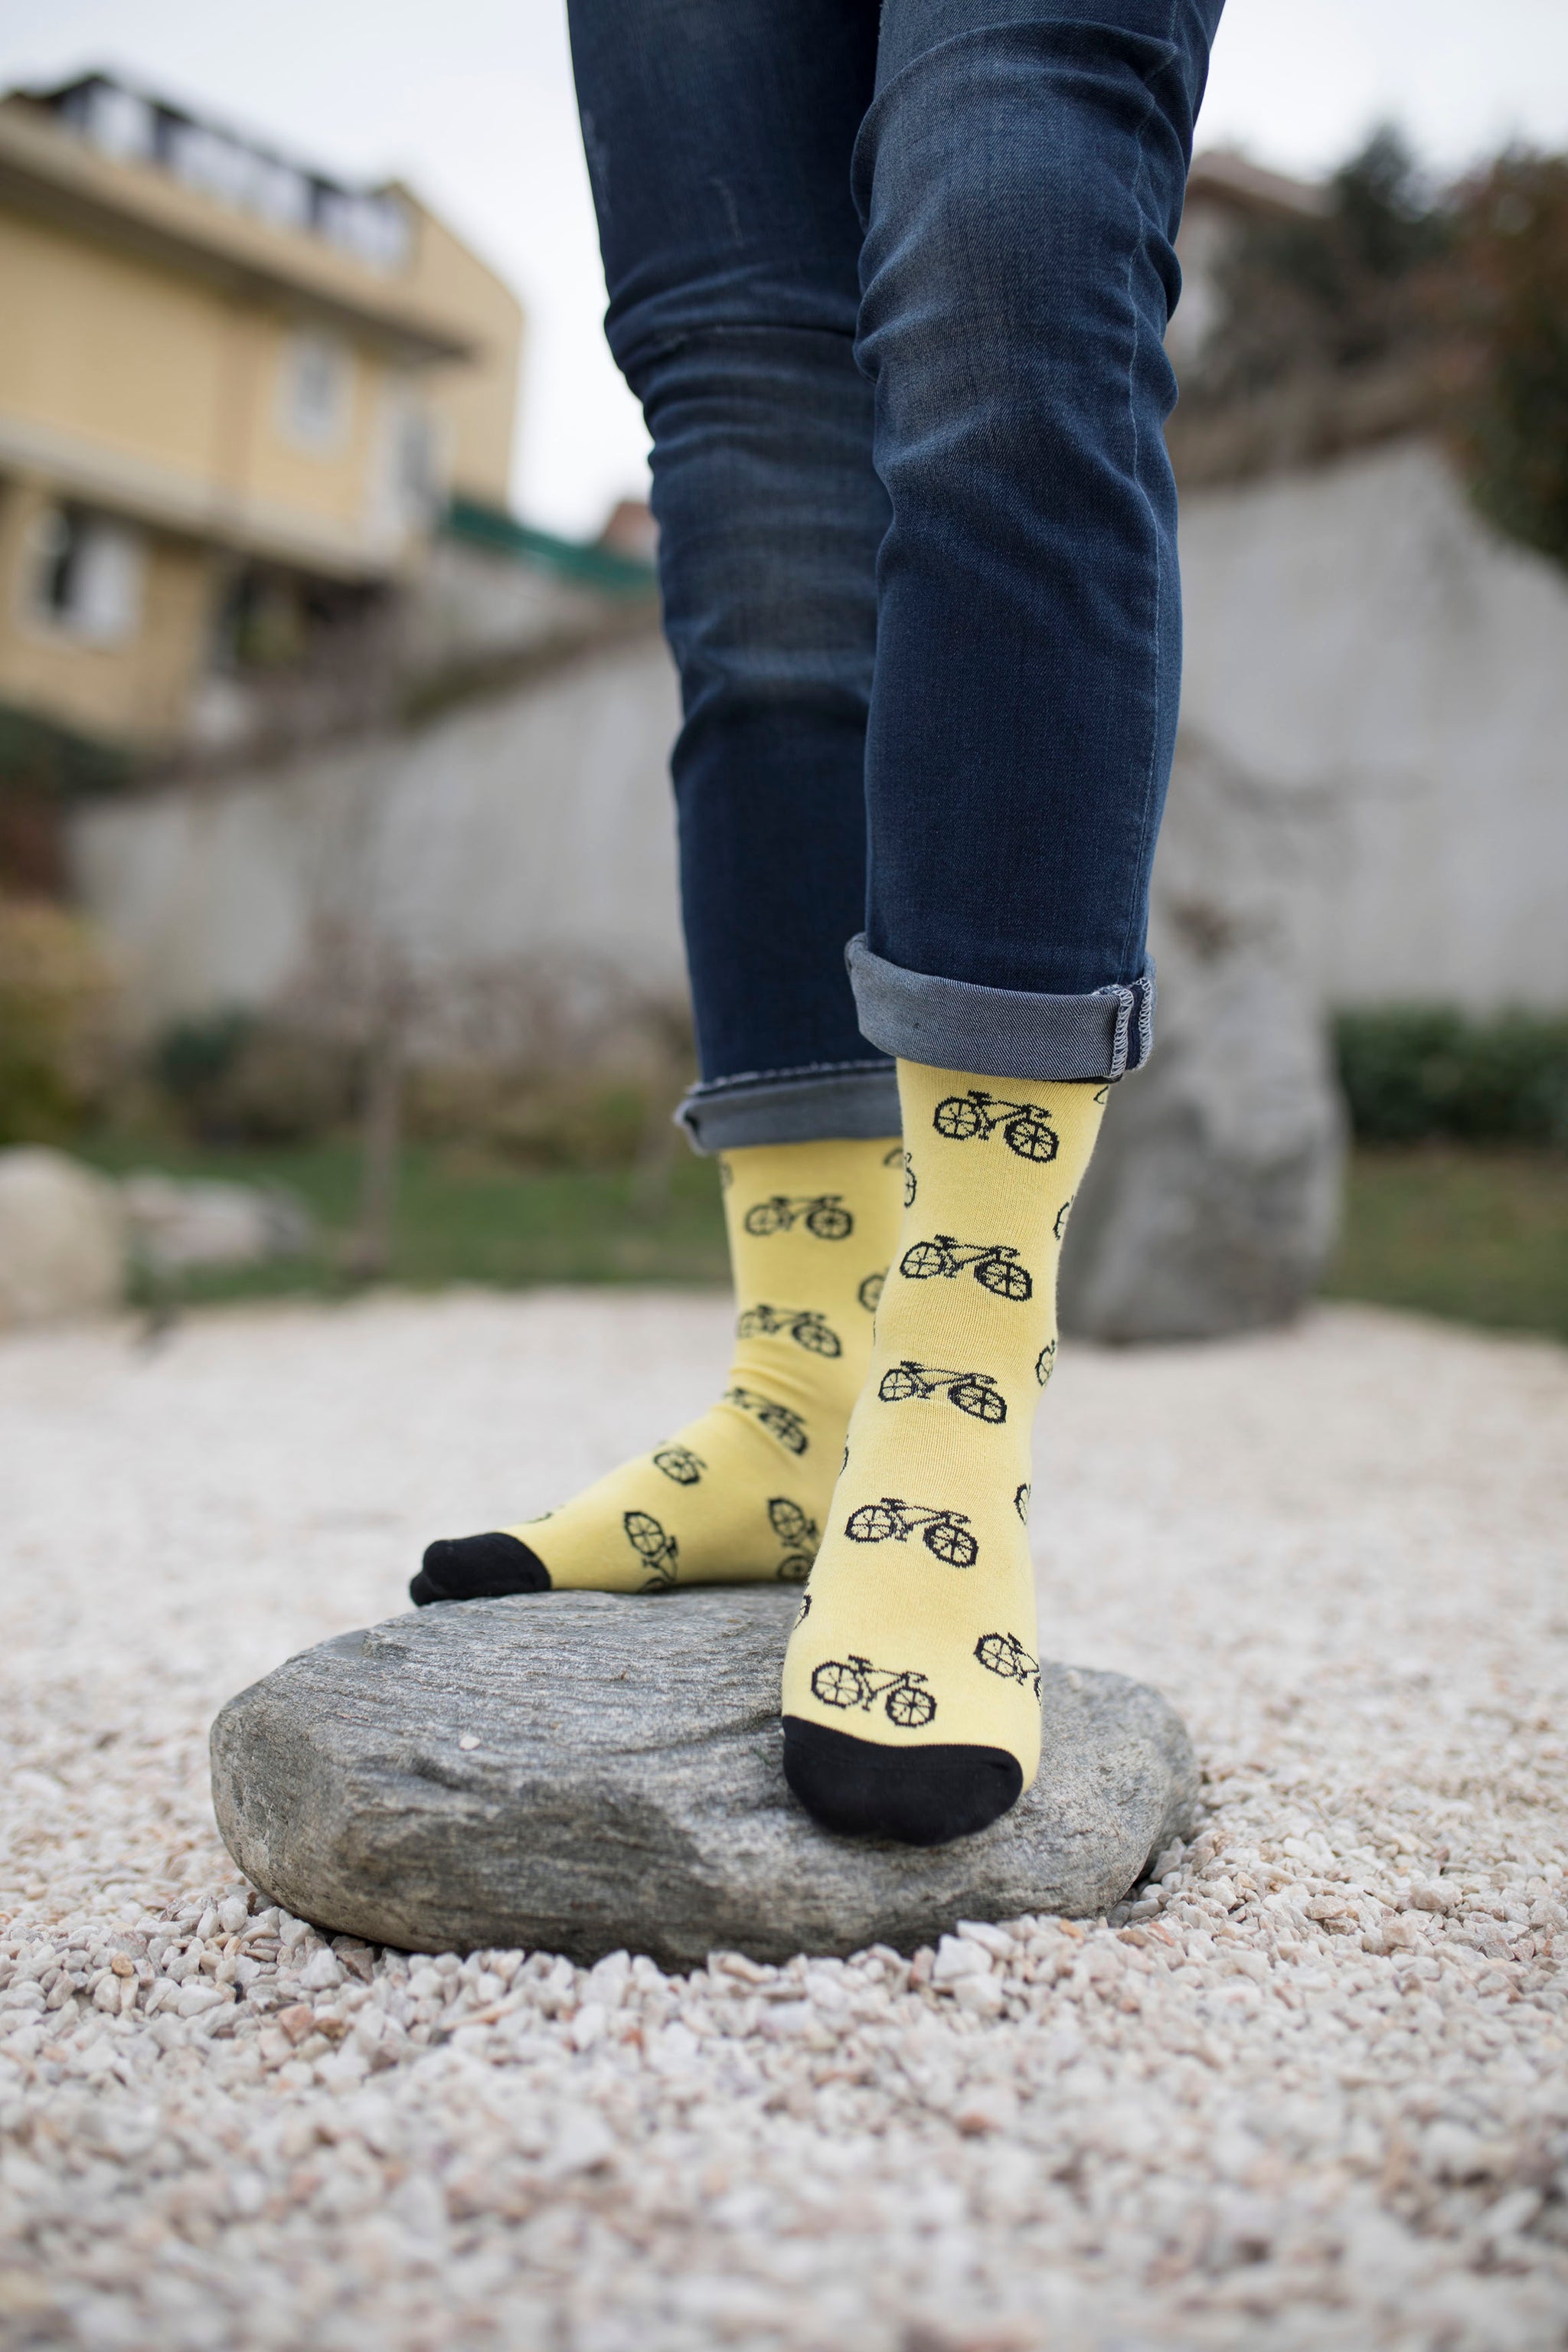 Men's Canary Bicycle Socks